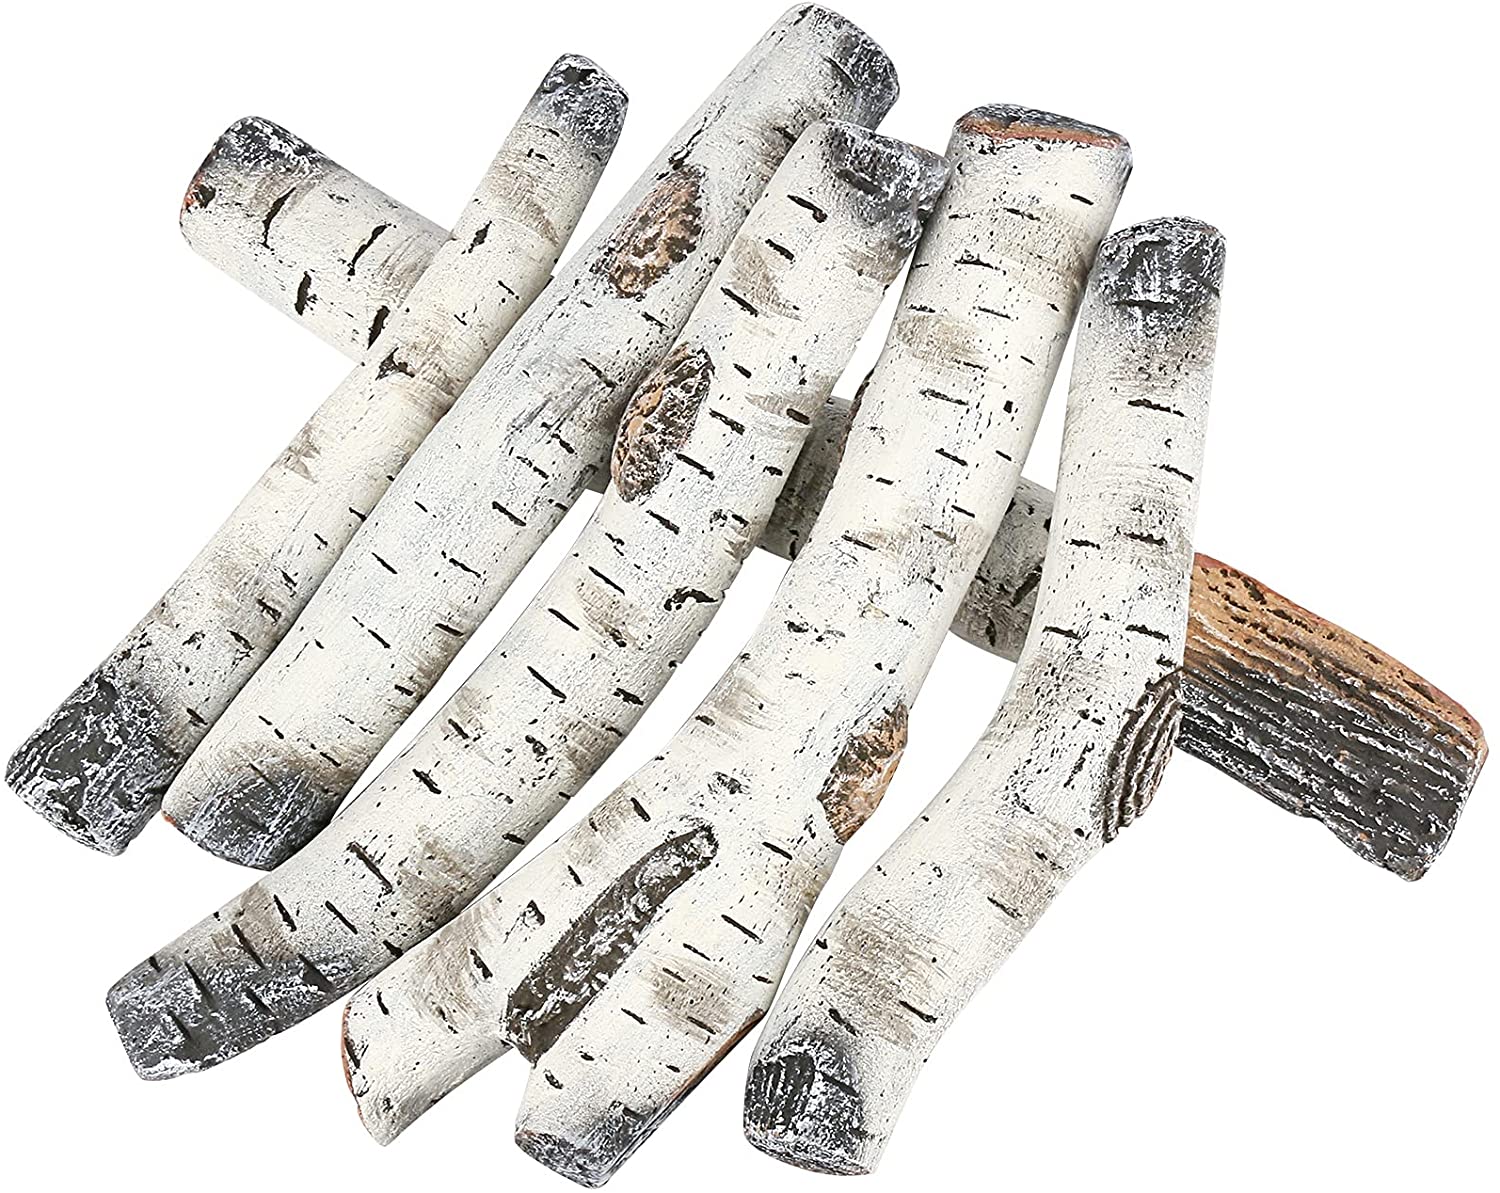 GrillPartsReplacement - Online BBQ Parts Retailer GAS Fireplace Logs, Ventless Ceramic Logs for GAS Fire Pits, 6 Pcs White Birch Wood Set, Electric, Propane GAS Fireplace Decorative Inserts